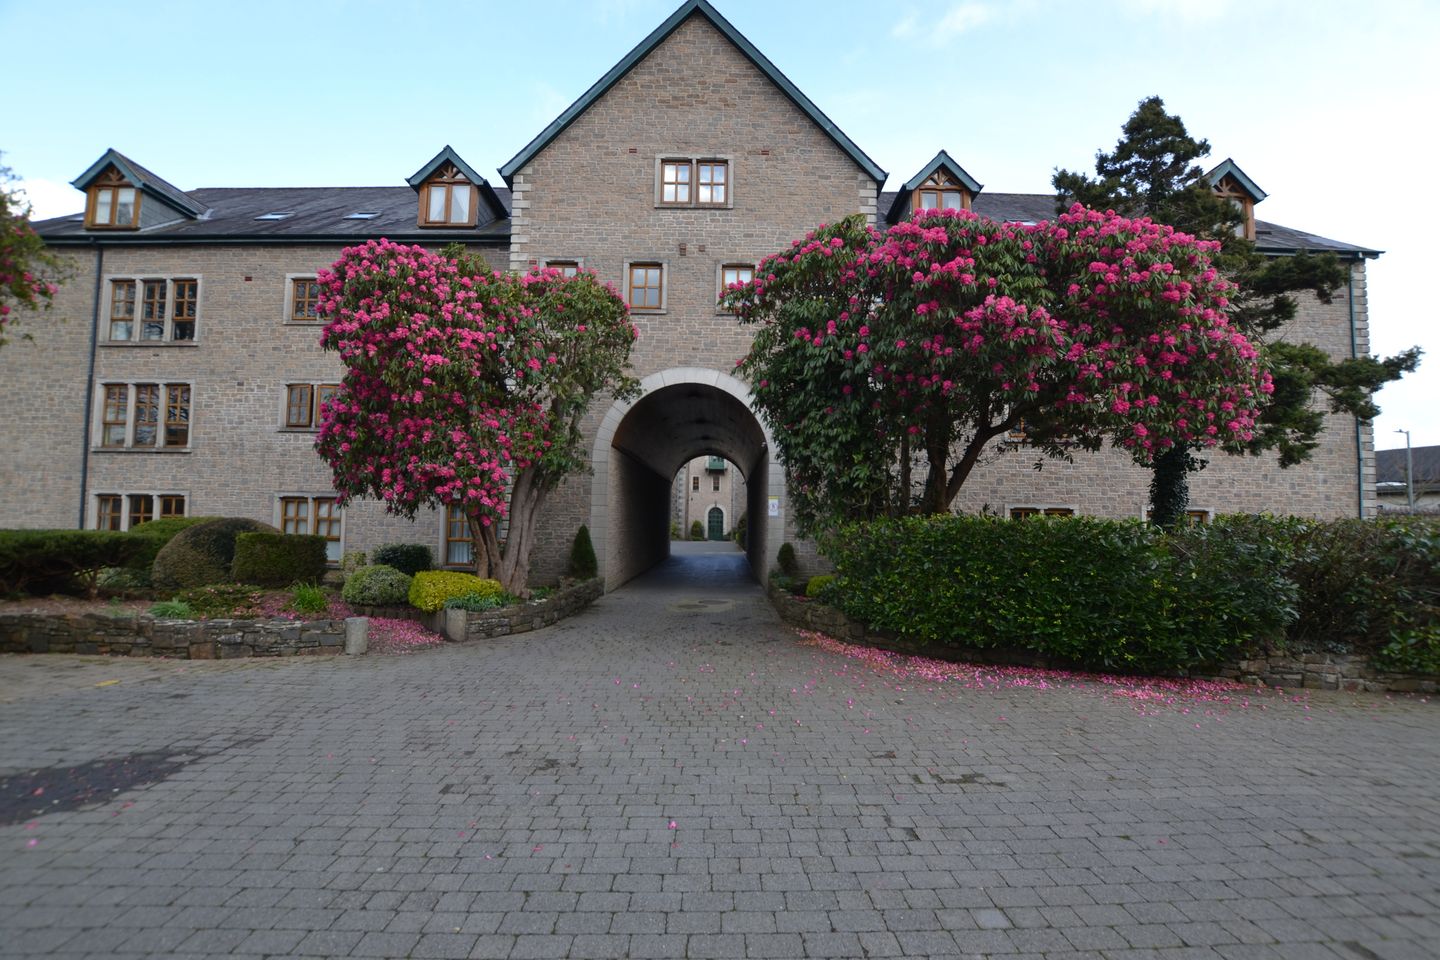 Apartment 2, Block 1, Priory Court, Gorey, Co. Wexford, Y25PF86